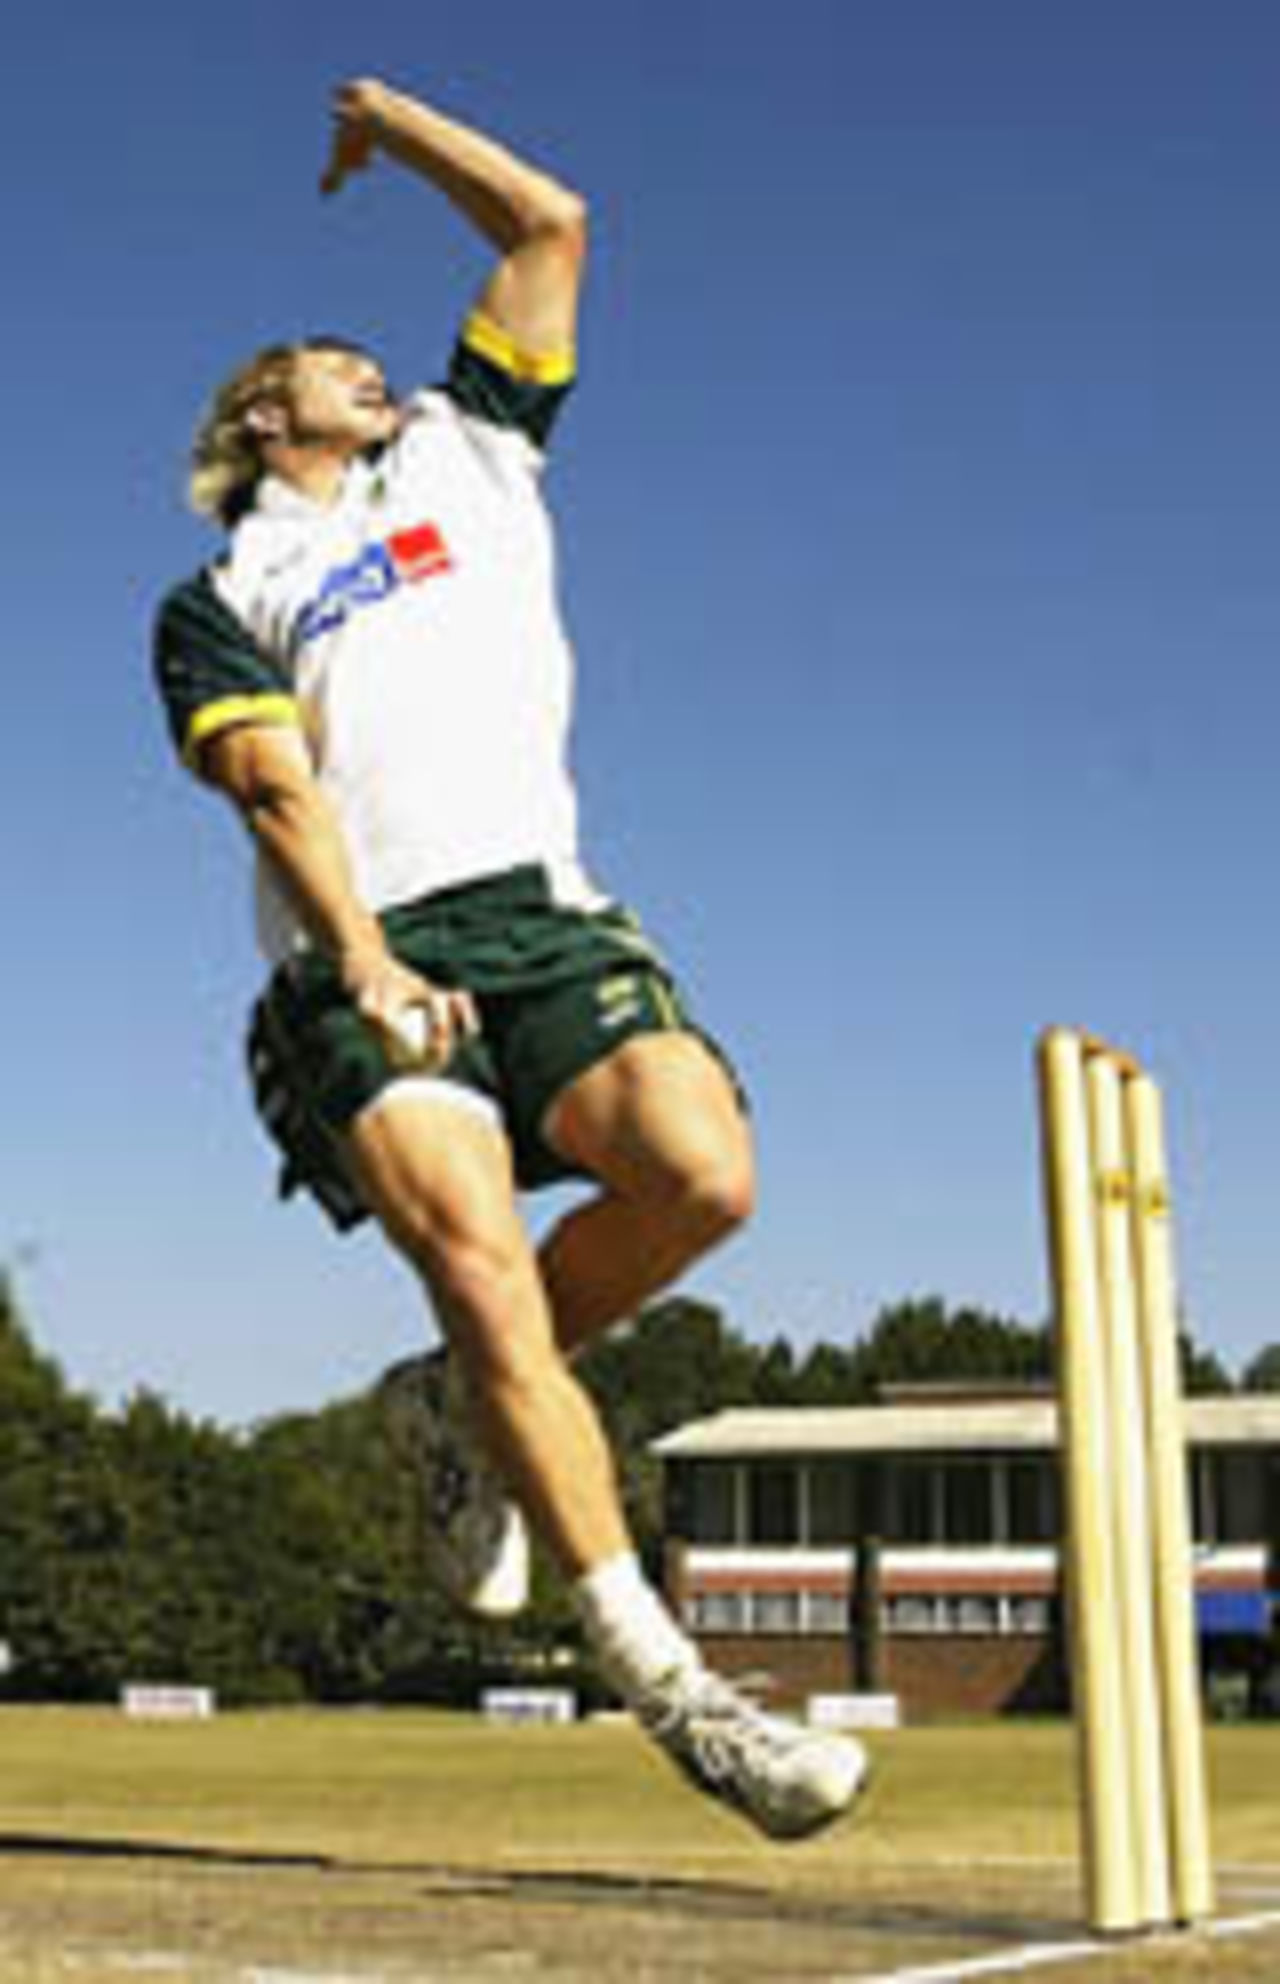 Shane Watson in the nets at Harare Sports Club, May 28, 2004